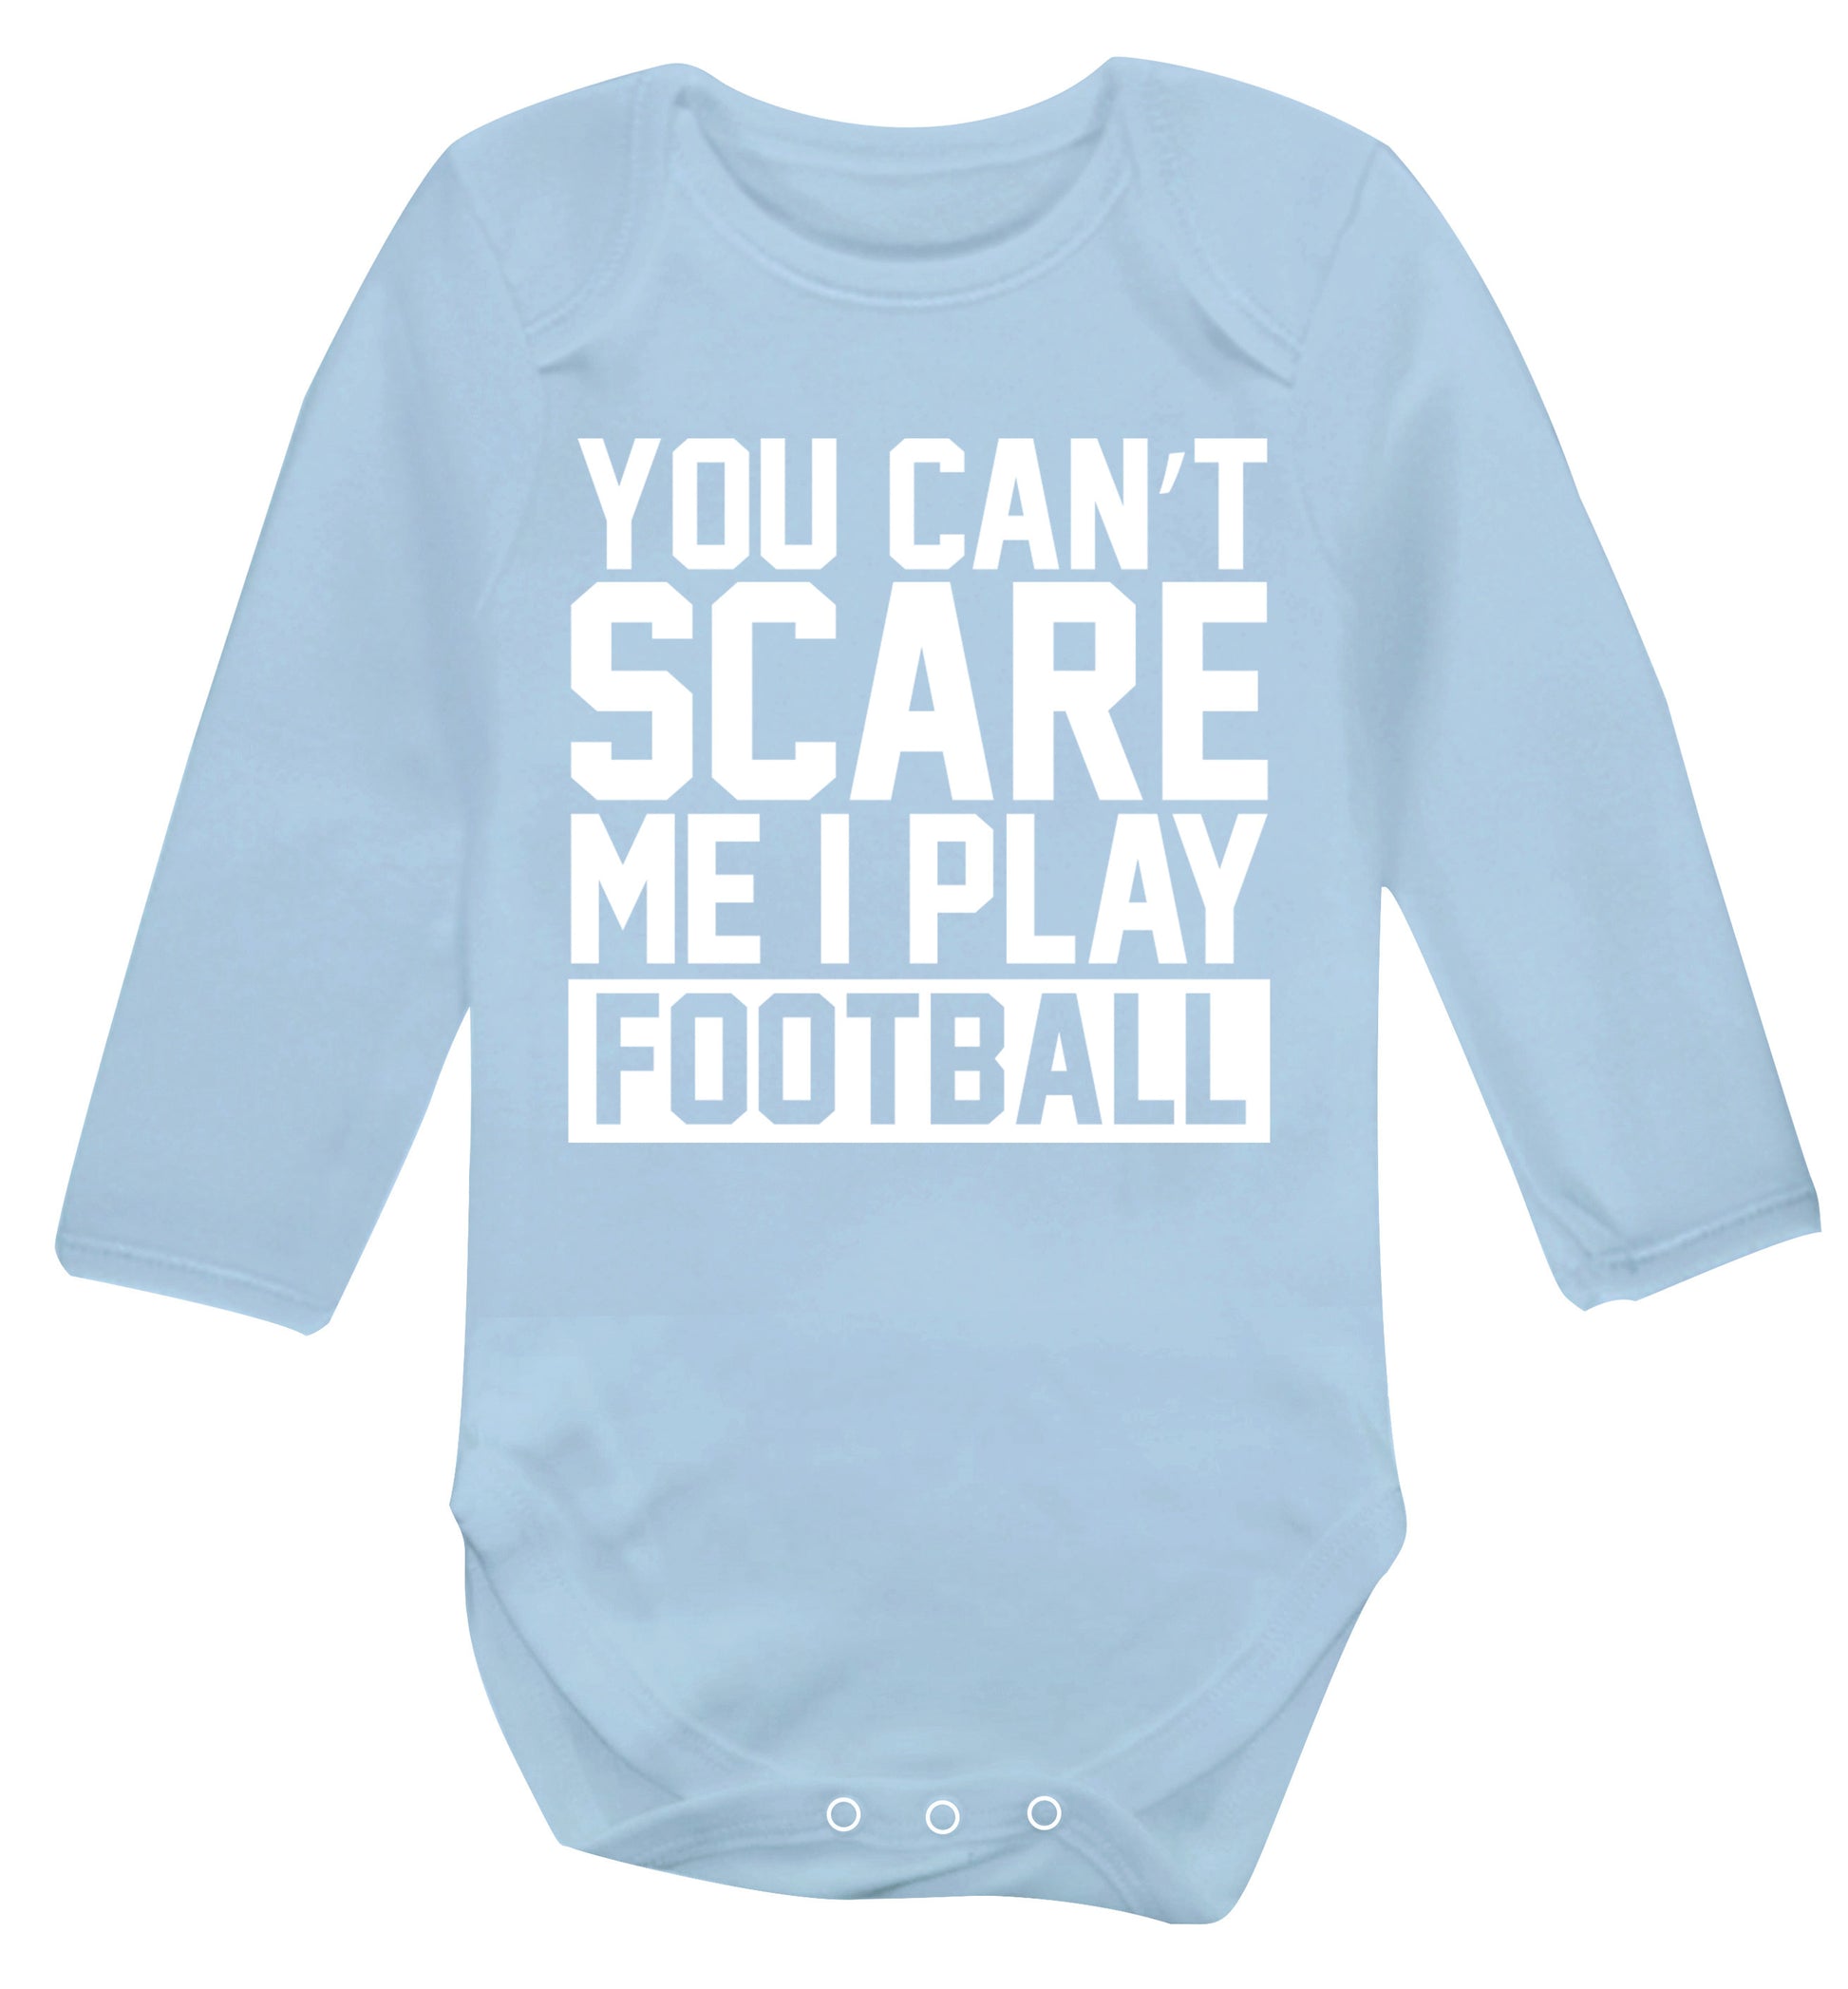 You can't scare me I play football Baby Vest long sleeved pale blue 6-12 months